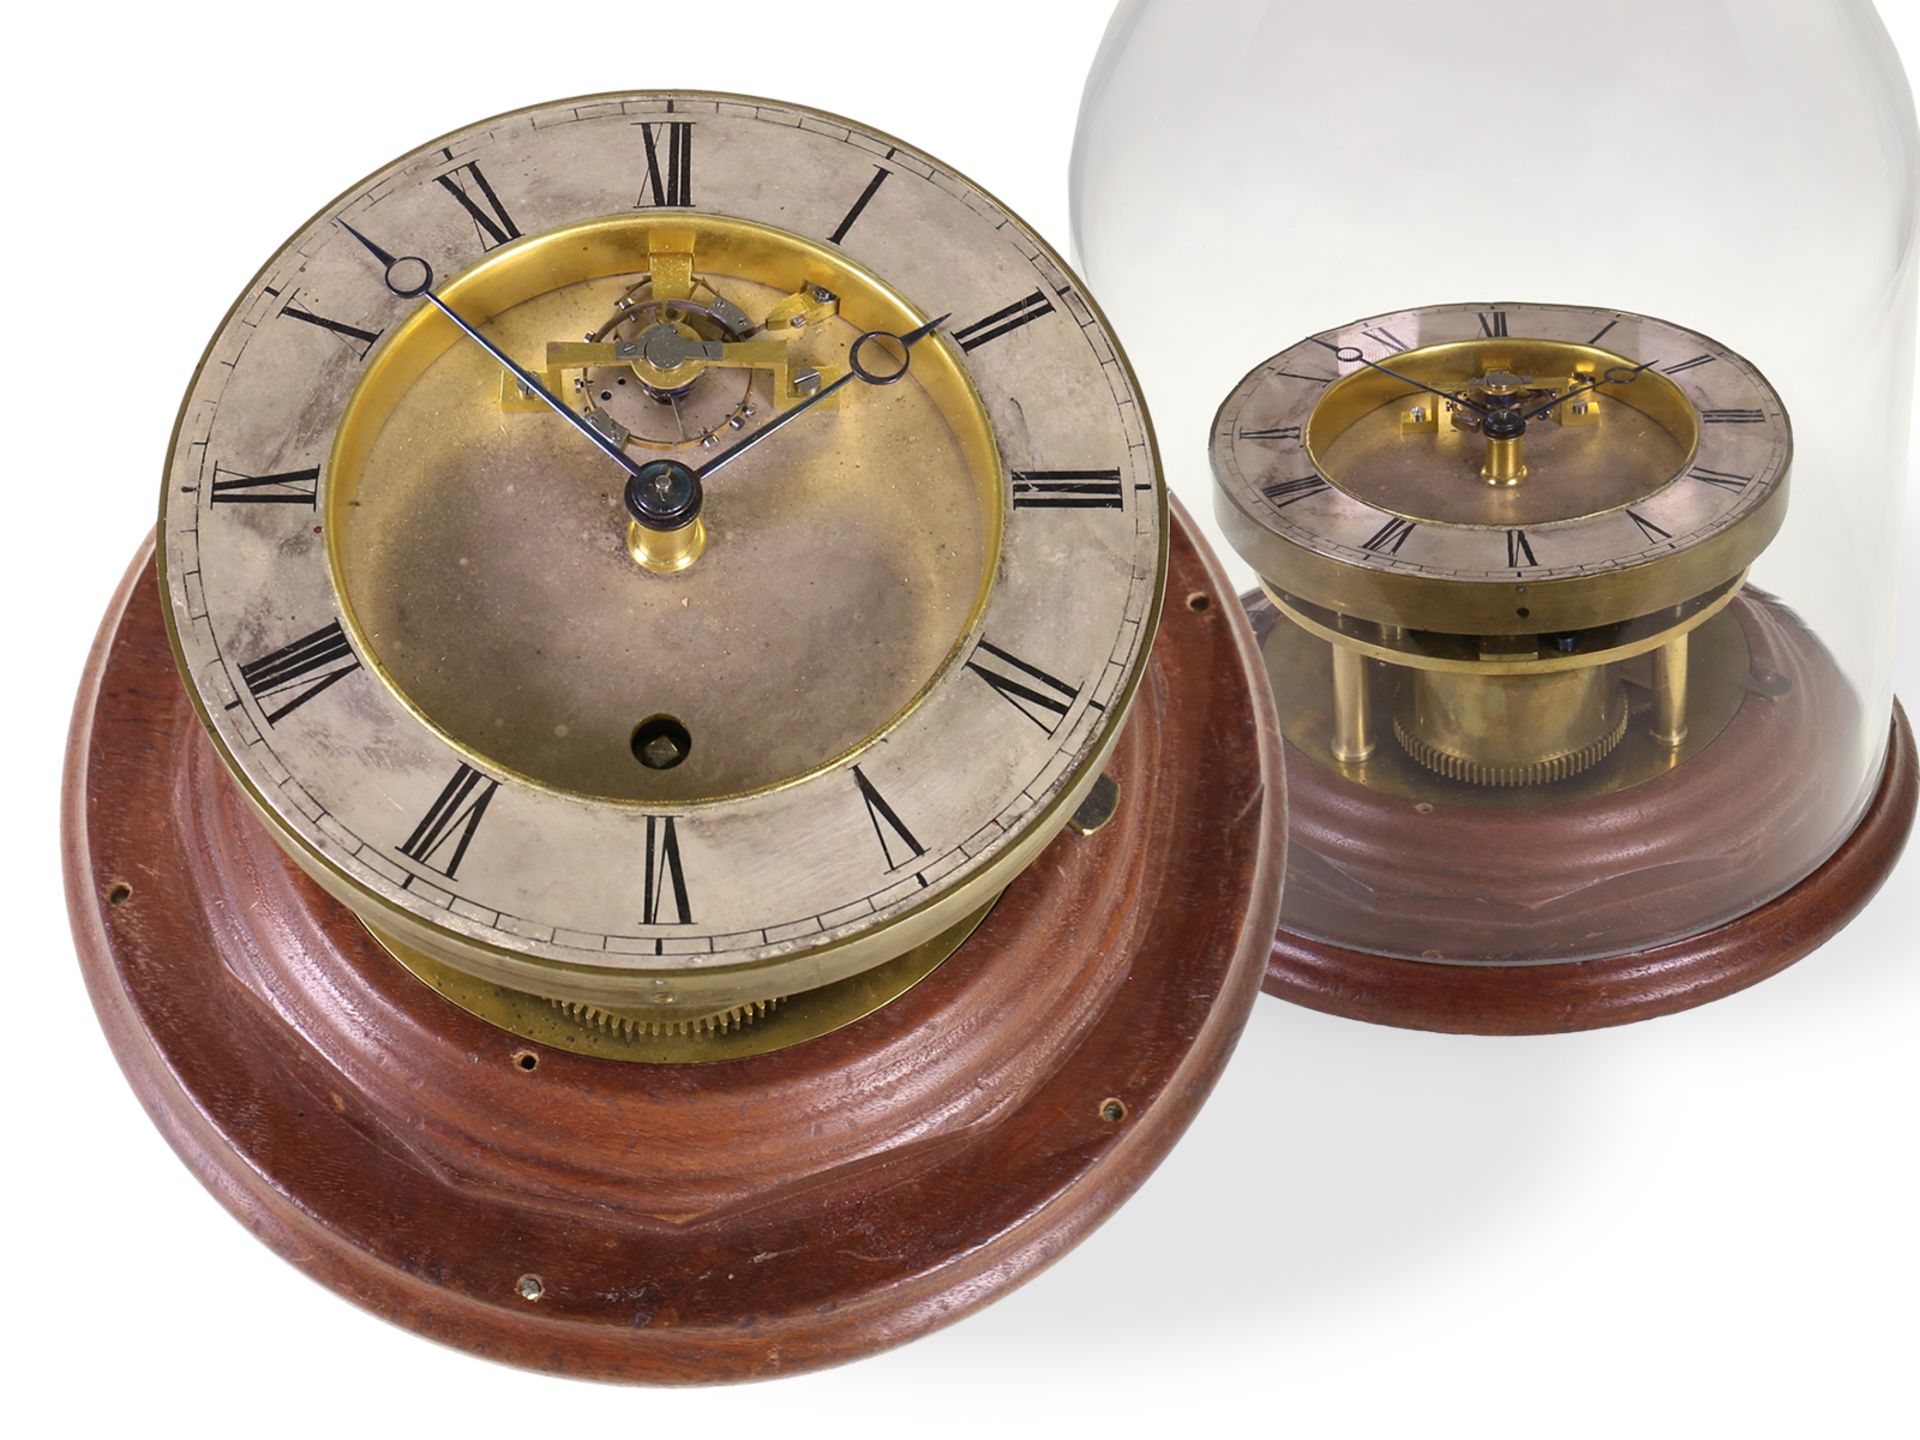 Unusual table chronometer/escapement model, possibly around 1840